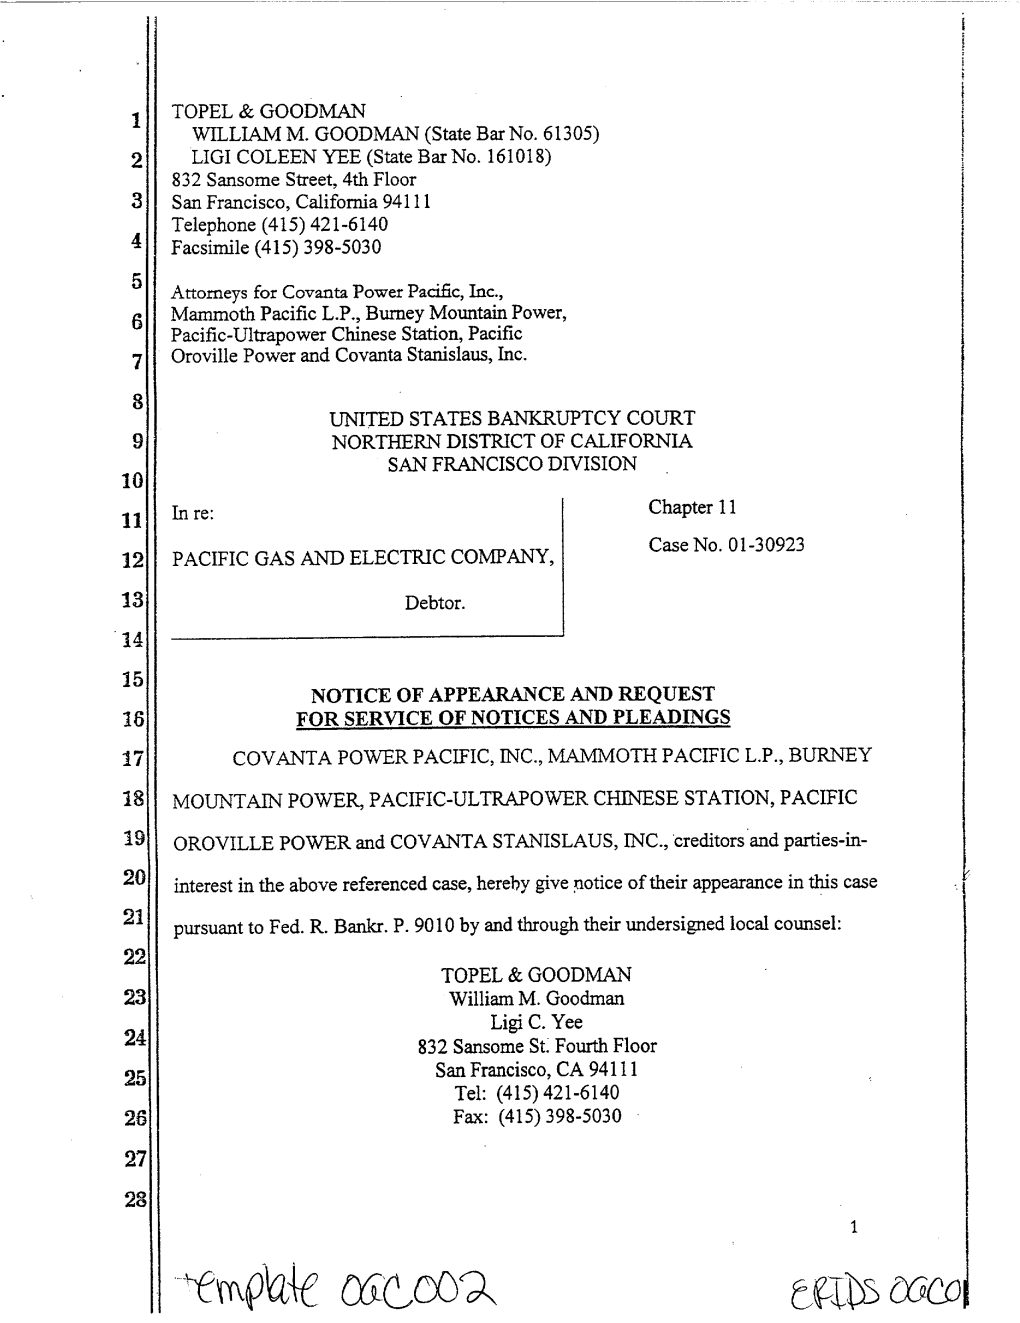 United States Bankruptcy Court Northern District of California San Francisco Division Notice of Appearance and Request for Servi